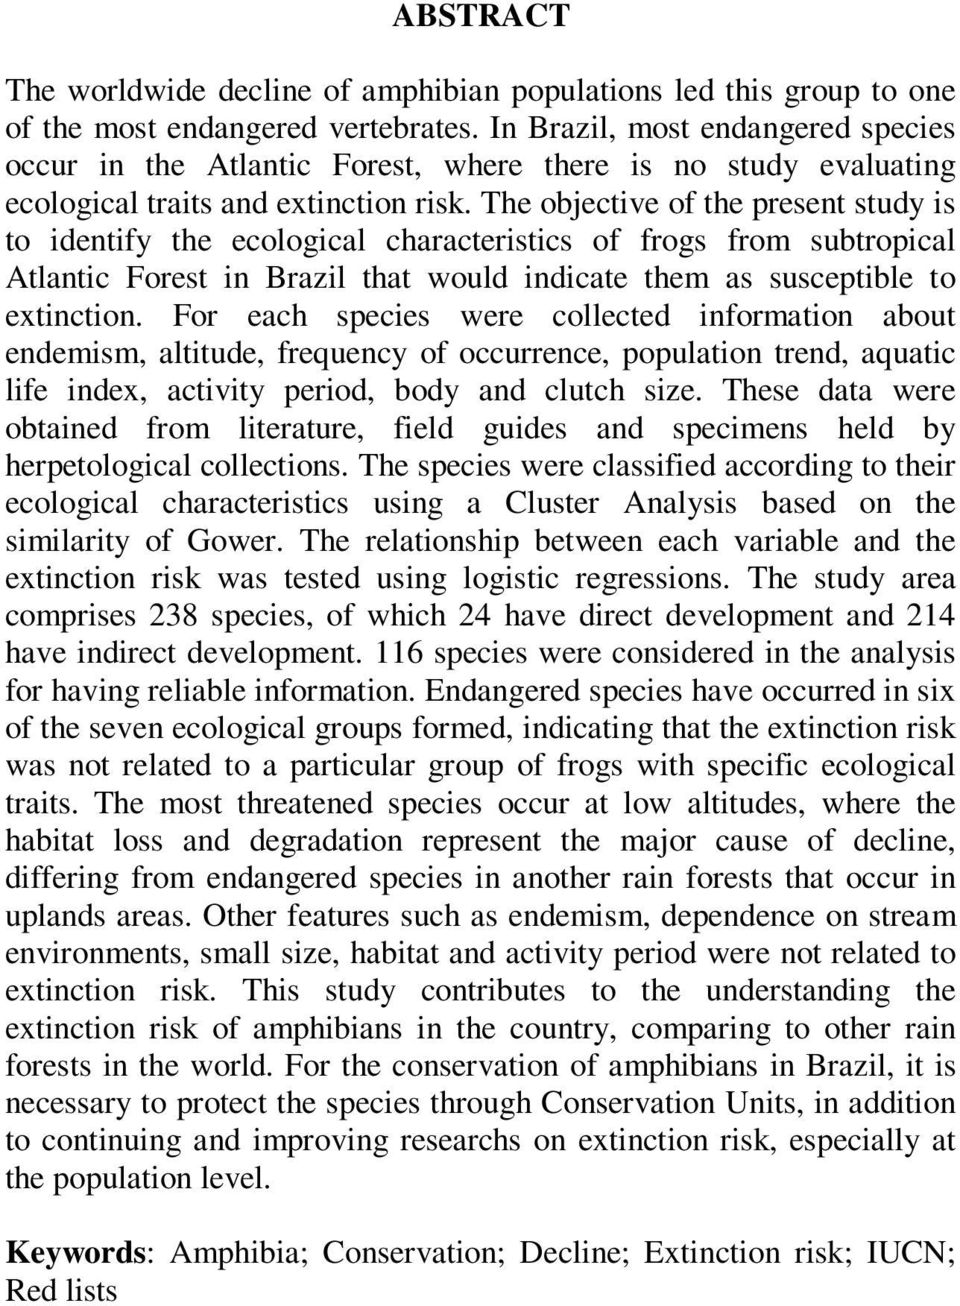 The objective of the present study is to identify the ecological characteristics of frogs from subtropical Atlantic Forest in Brazil that would indicate them as susceptible to extinction.